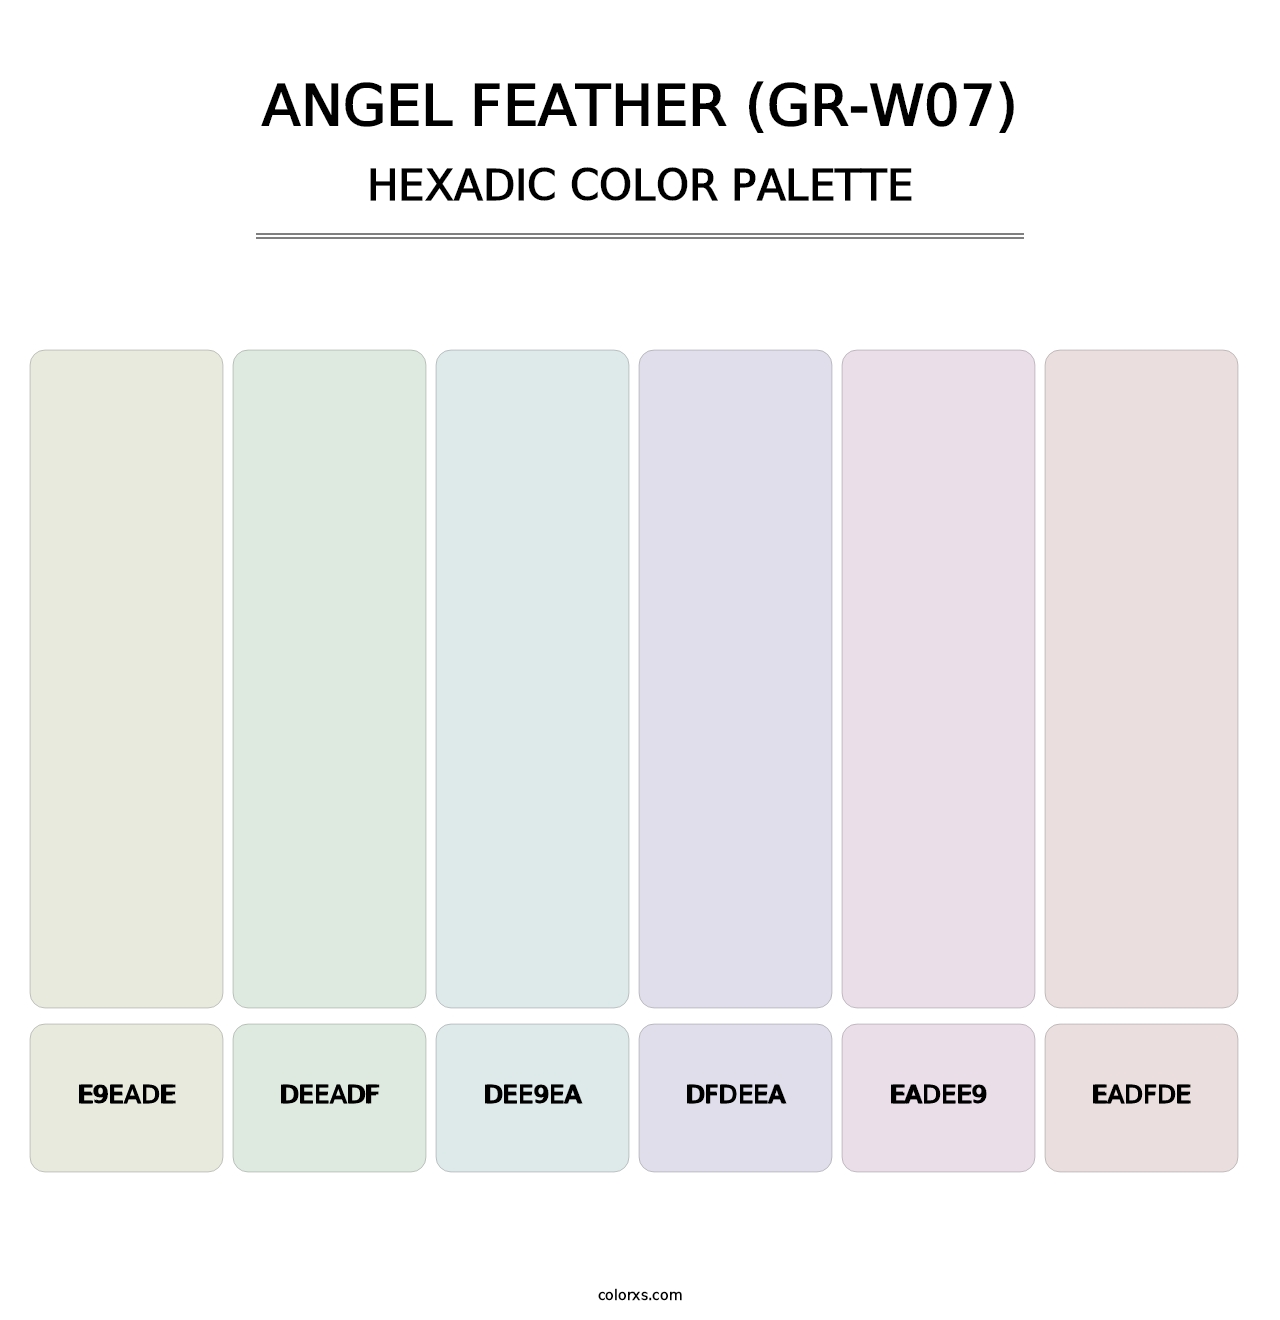 Angel Feather (GR-W07) - Hexadic Color Palette